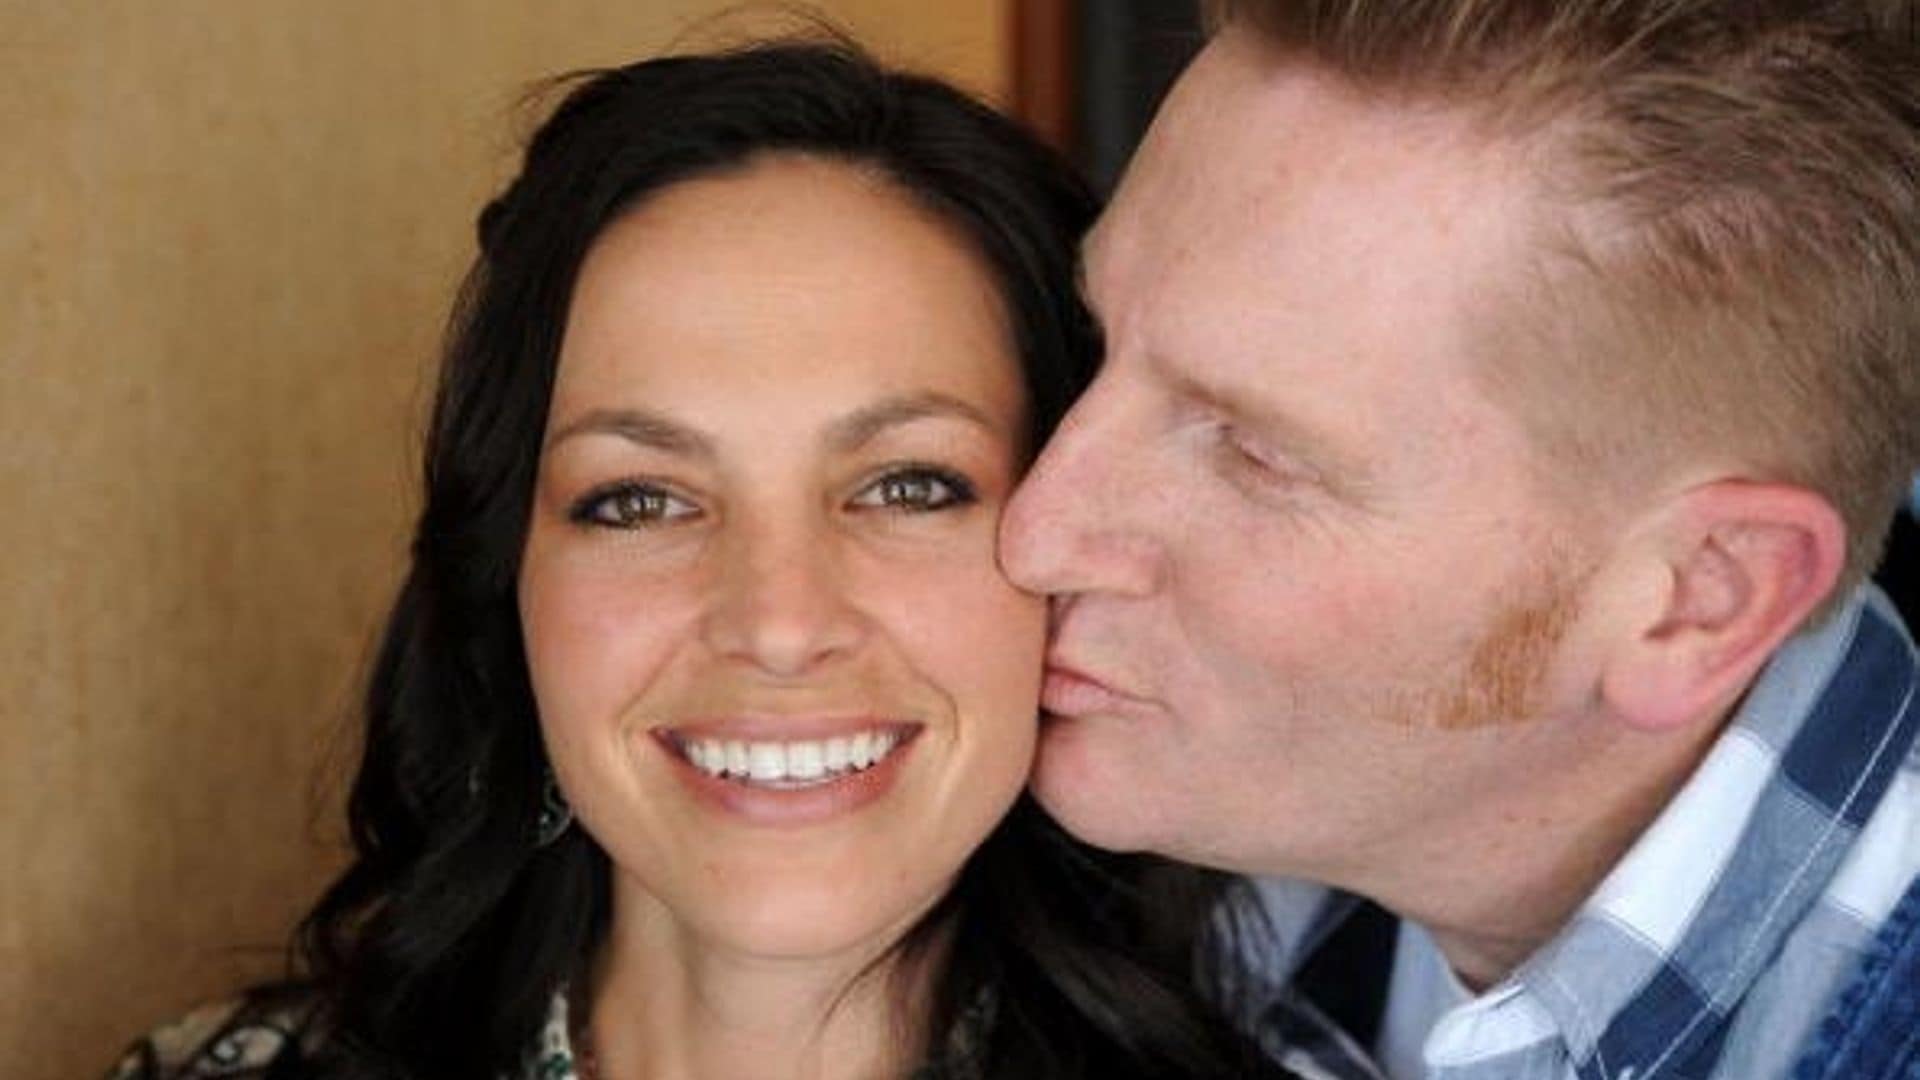 Joey Feek cuddles close to her daughters in moving photo